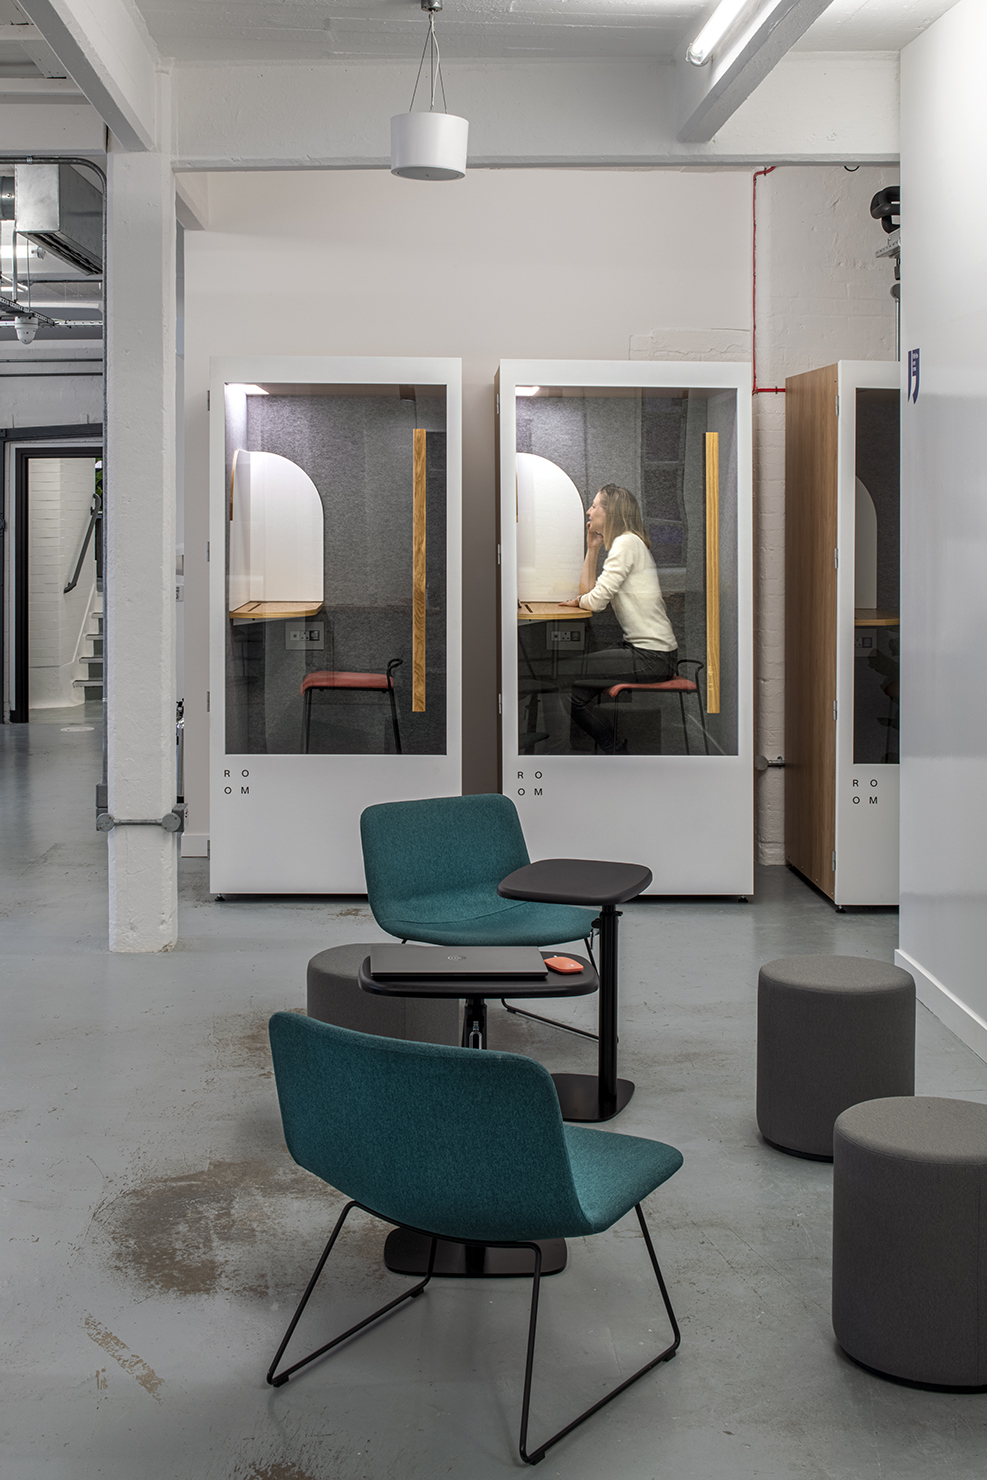 ROOM booths at Wise’s London workplace are made from recycled plastic bottles